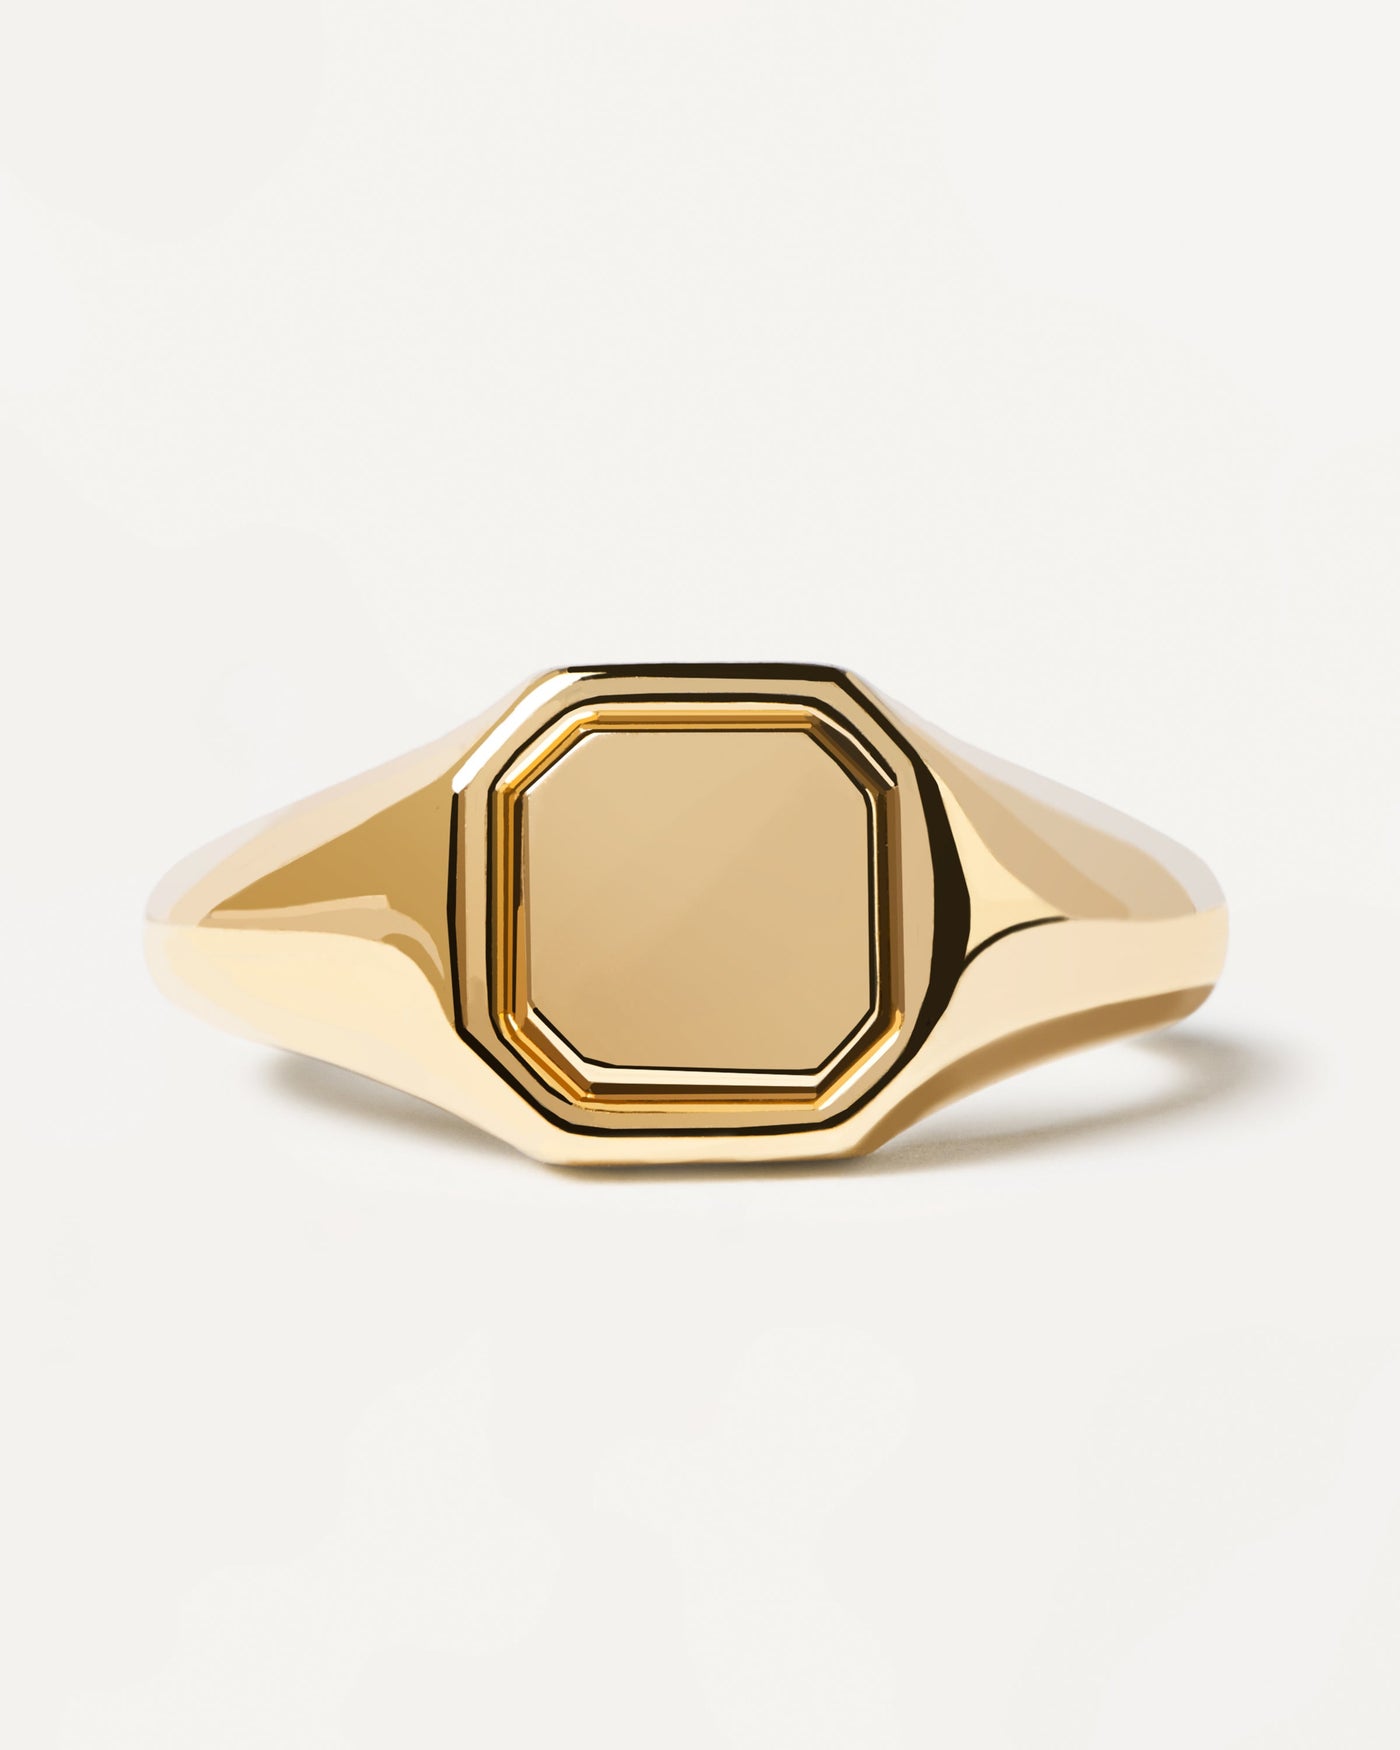 2023 Selection | Octet Stamp Ring. Engravable octagonal gold-plated signet ring. Get the latest arrival from PDPAOLA. Place your order safely and get this Best Seller. Free Shipping.